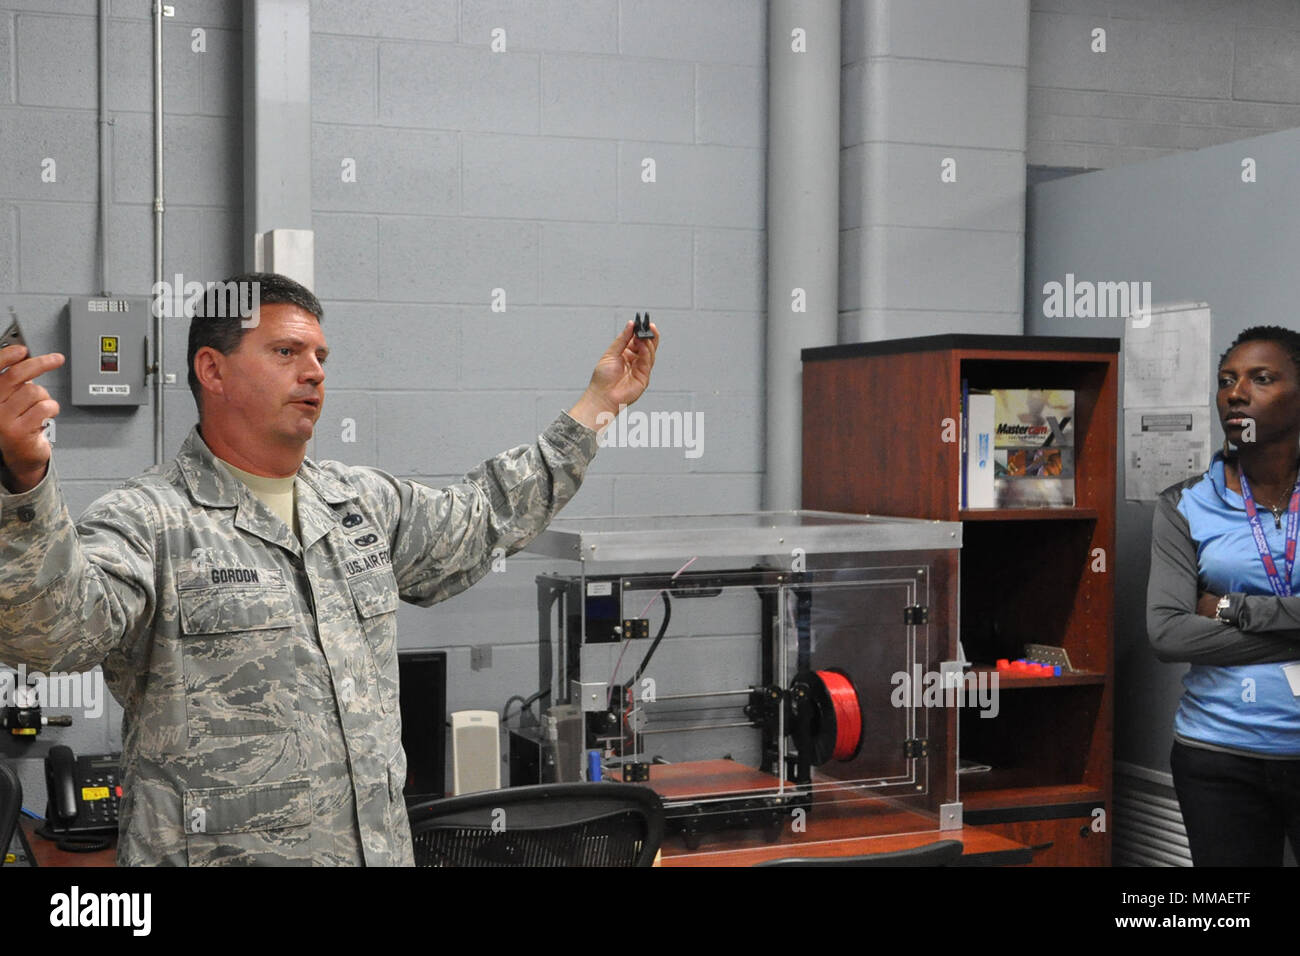 YOUNGSTOWN AIR RESERVE STATION, Ohio – Air Force Reserve Tech. Sgt. Ross Gordon, a metals technology journeyman assigned to the 910th Maintenance Squadron, shows two brackets to explain one of the capabilities in his work center to a group of more than 30 educators in Hangar 305 here, Sept. 27, 2017. The bracket in Gordon’s right hand was produced through conventional manufacturing methods and the bracket in Gordon’s left hand was created on a 3-D printer in the 910th’s metal fabrication work center here. The purpose of the Educator Awareness Event was to allow attendees to learn more about Ai Stock Photo